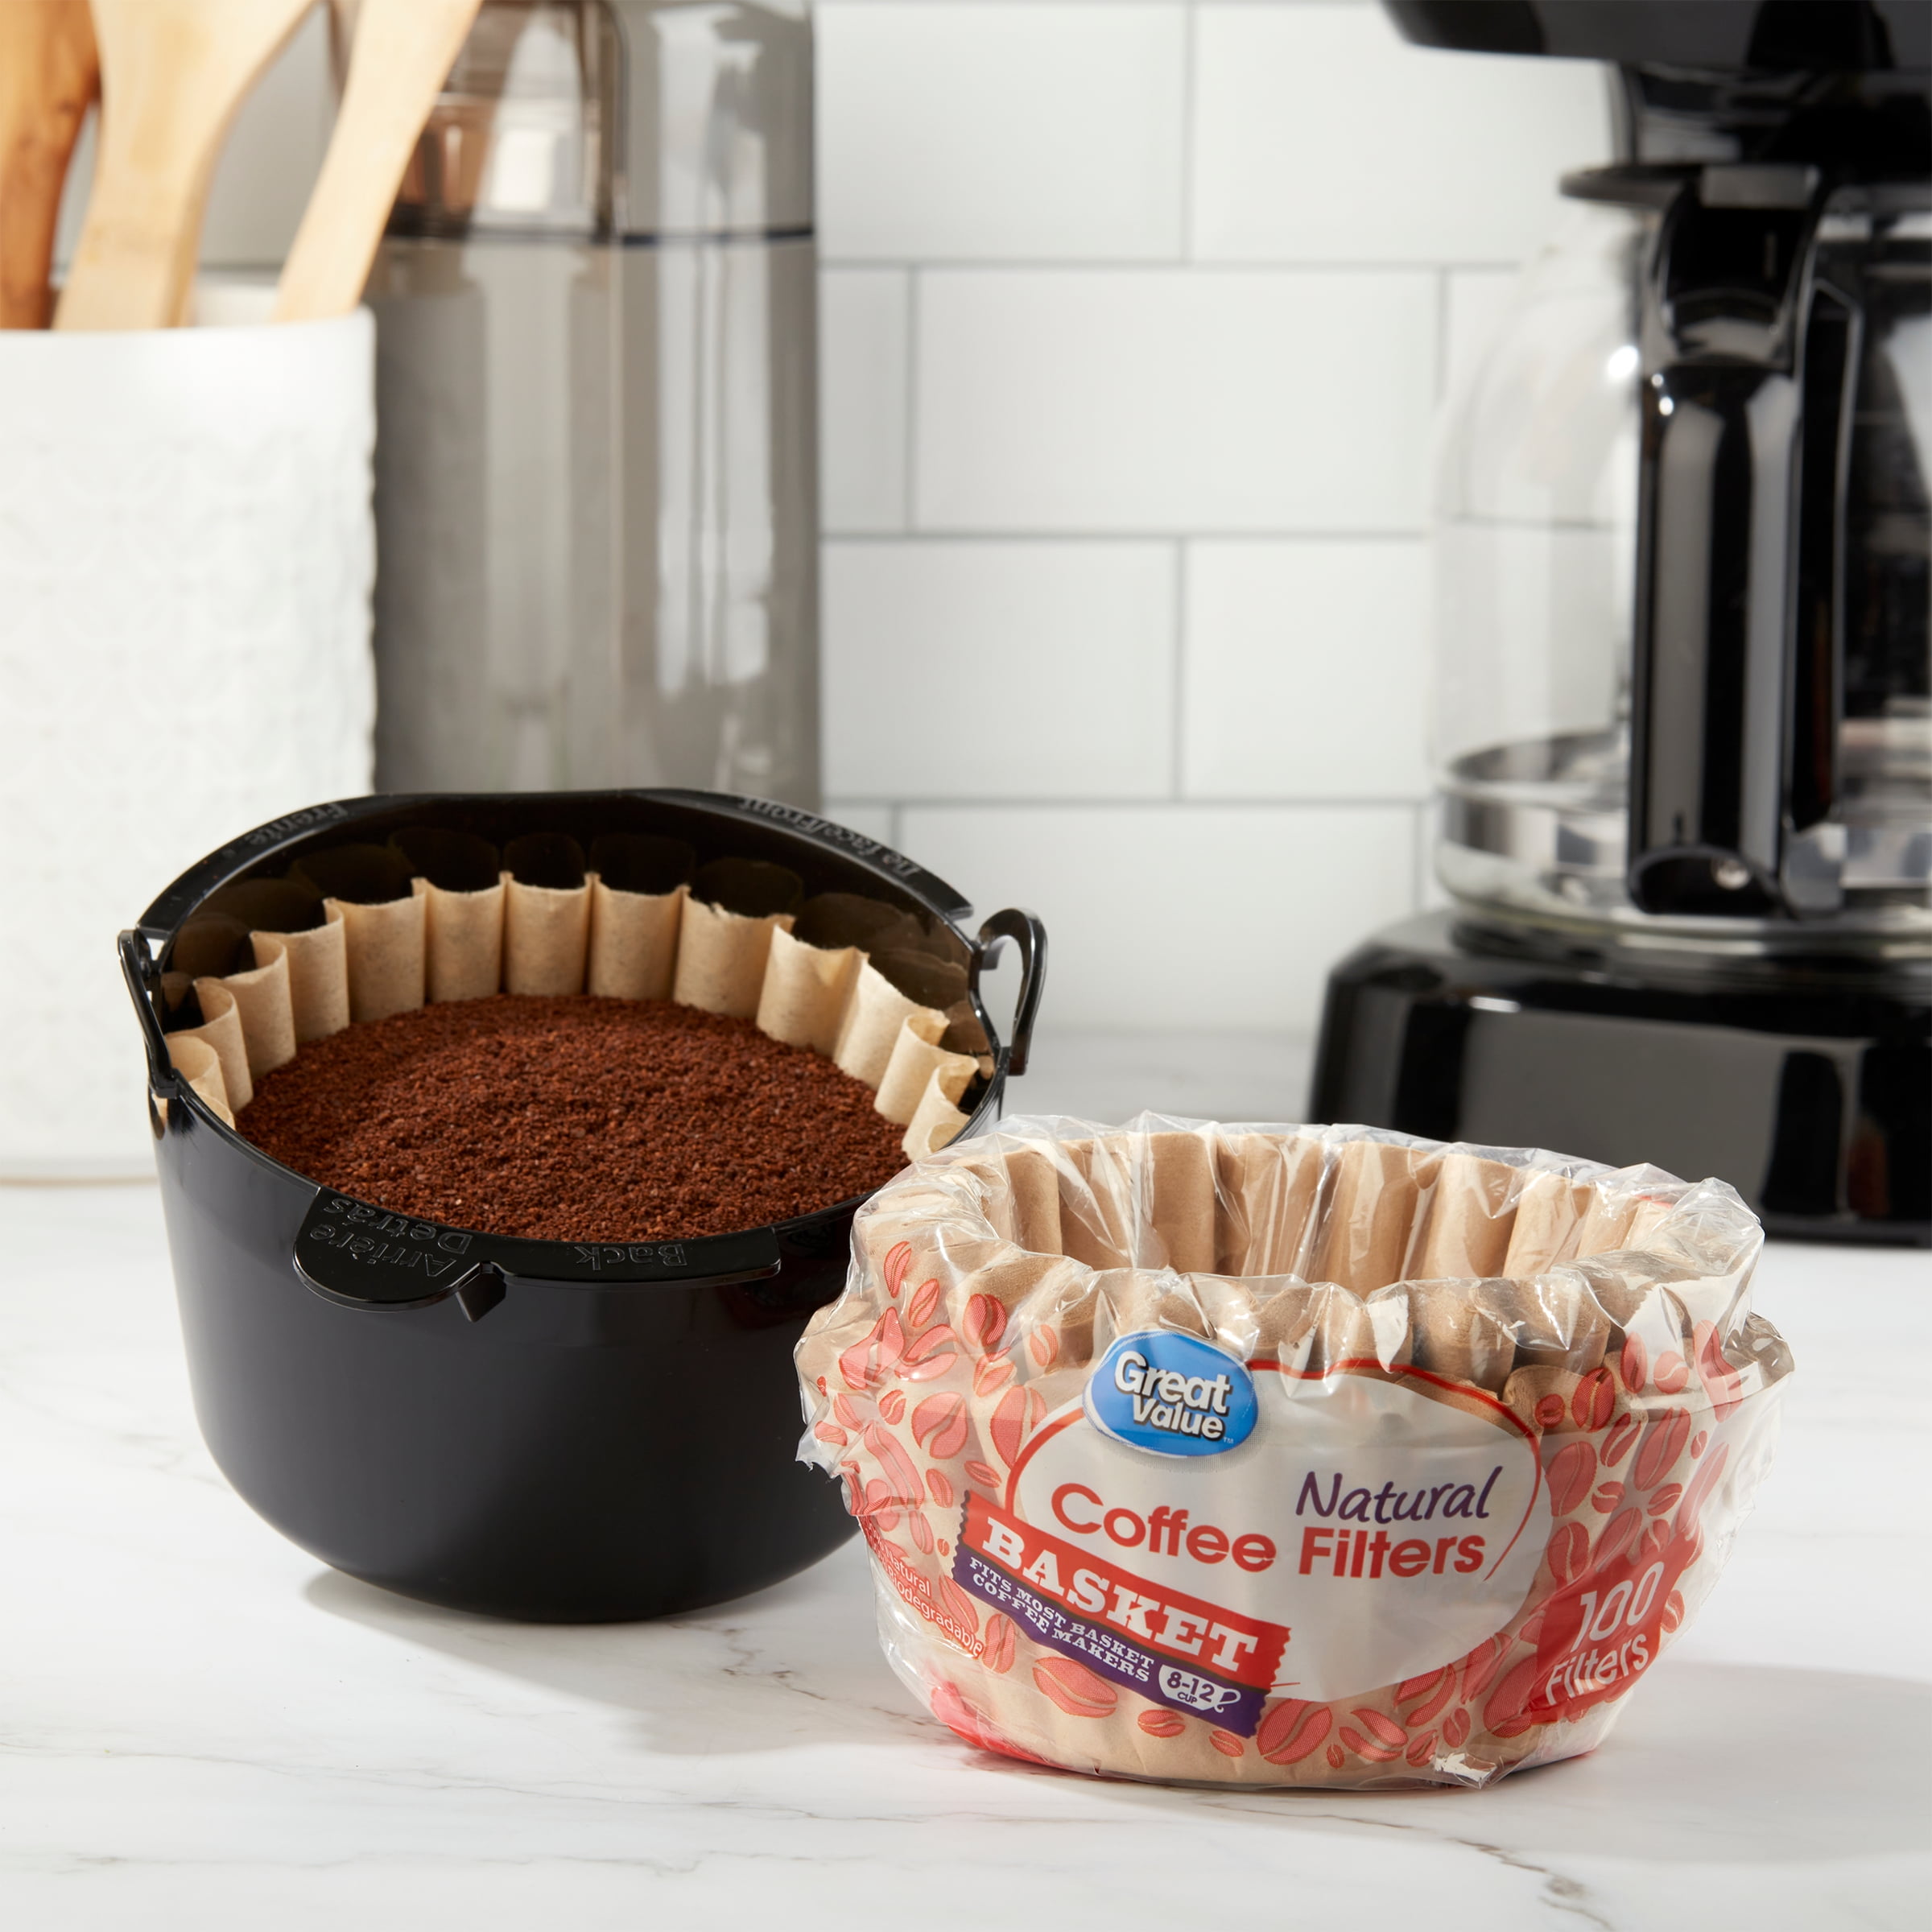 Extra Large Coffee Filters - 1.5 - 3 Gallon 13 x 5 Coffee & Tea Filter  250-Count - Tall Walled to Prevent Ground Overflow - Chlorine Free White 